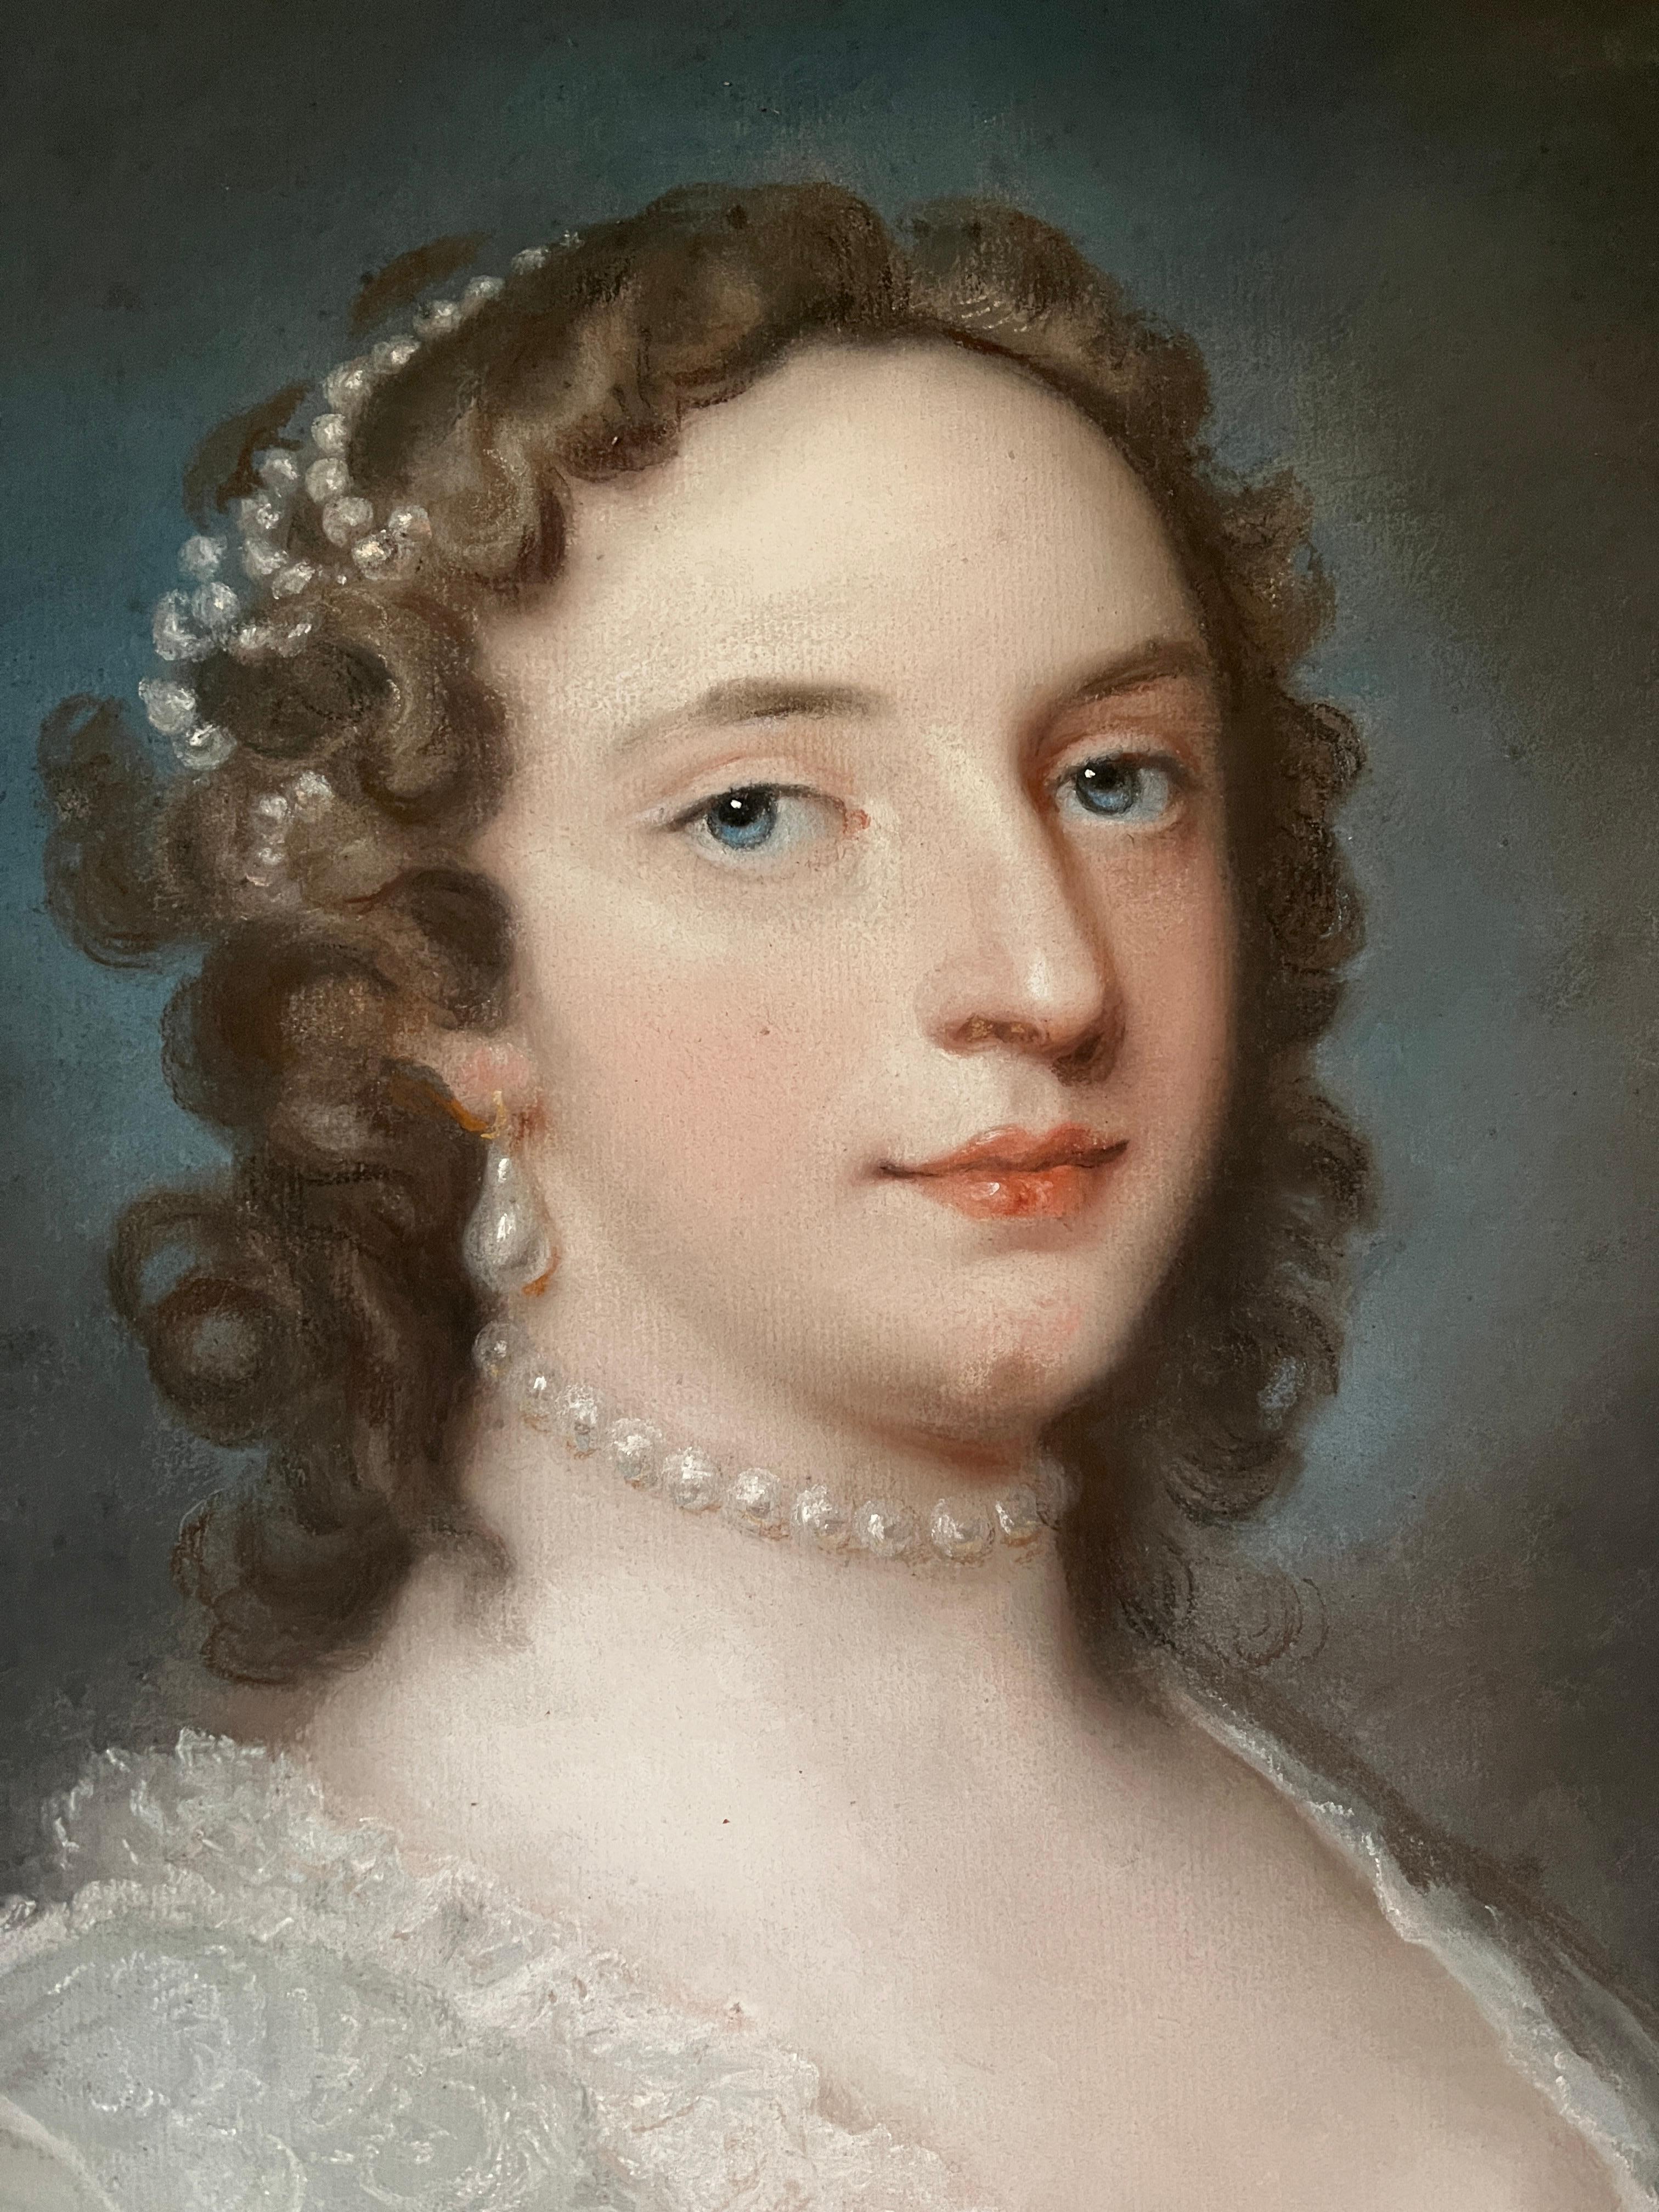 PORTRAIT OF A LADY IN PEARLS - Art by William Hoare